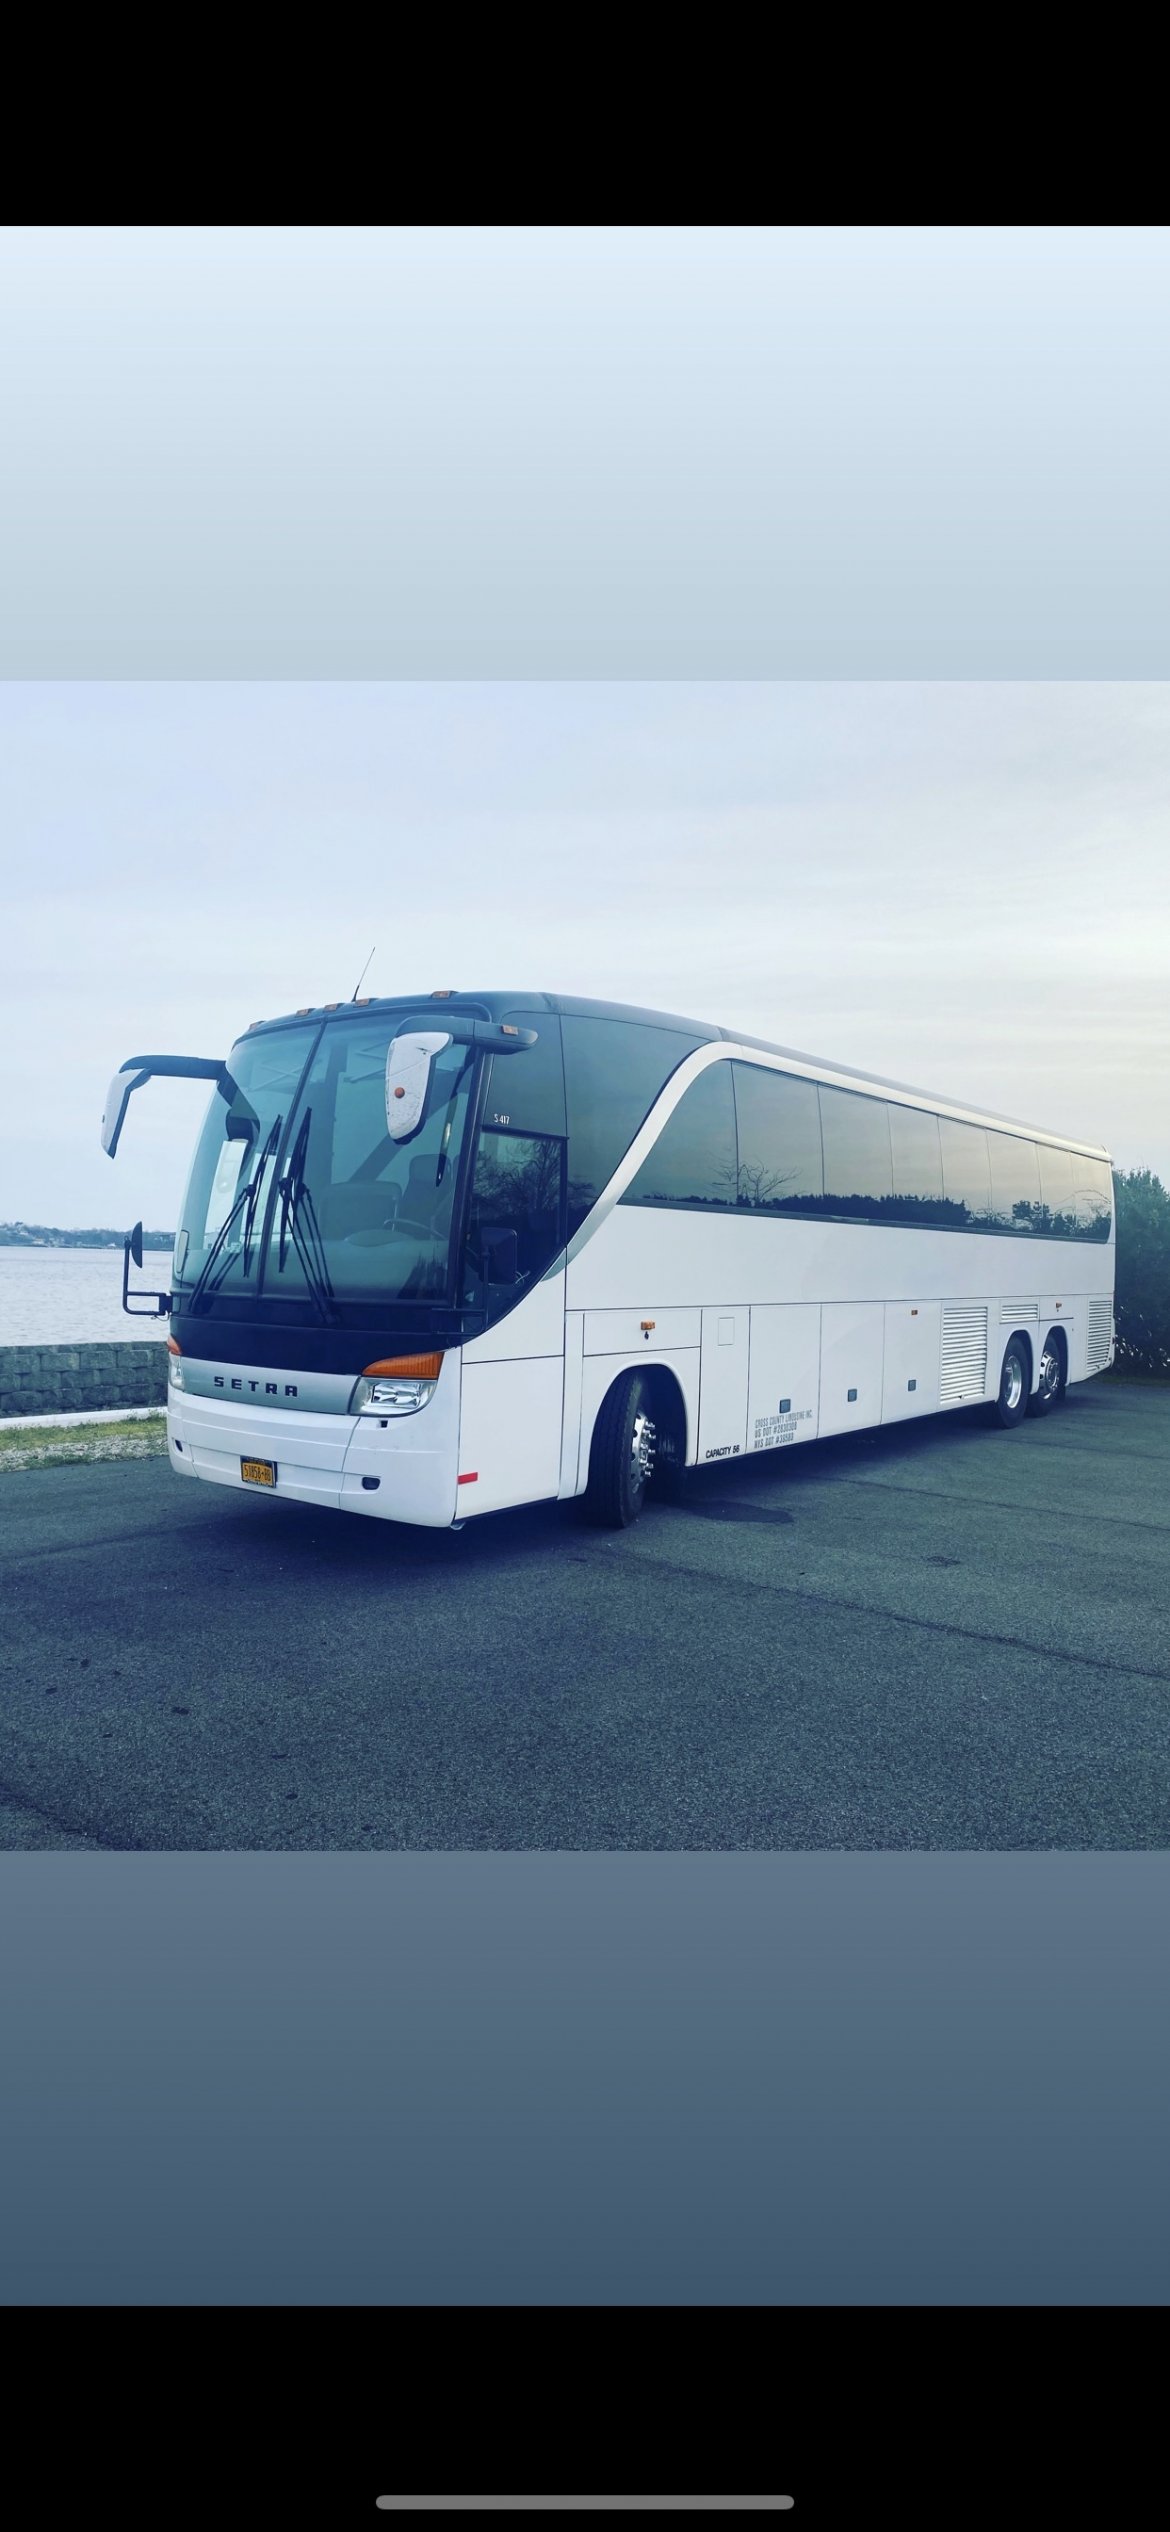 Shuttle Bus for sale: 2009 Mercedes-Benz Setra by Factory build